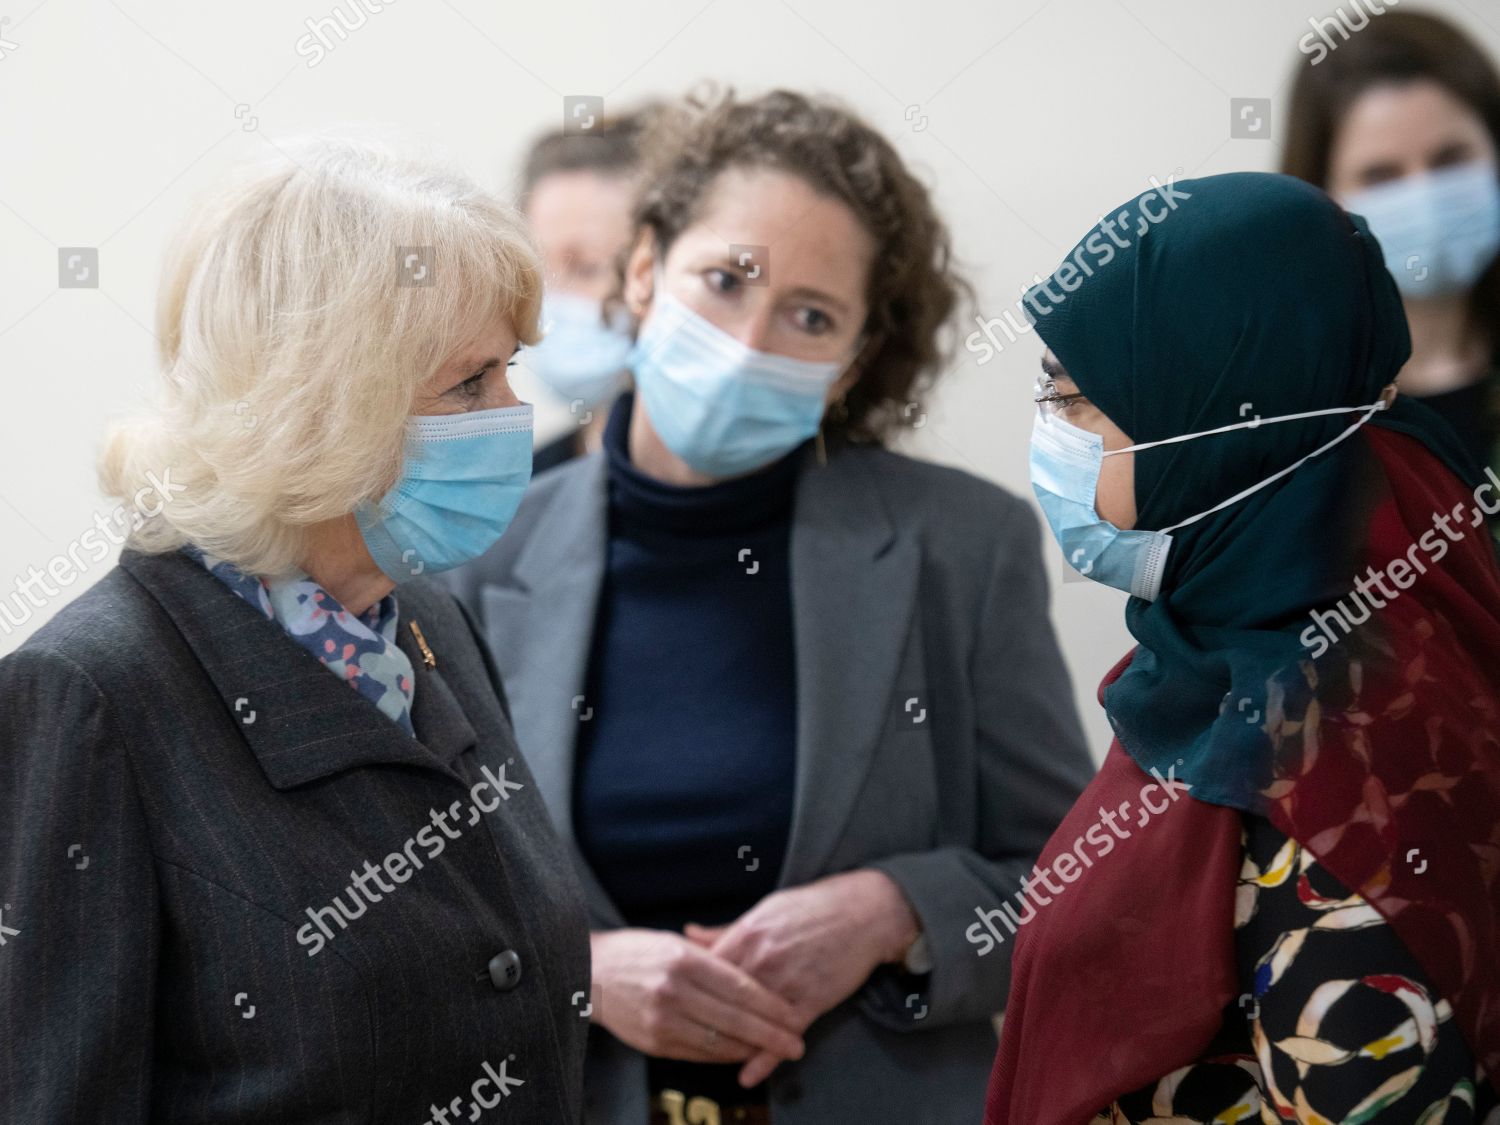 prince-charles-and-camilla-duchess-of-cornwall-visit-vaccination-pop-up-centre-at-finsbury-park-mosque-london-uk-shutterstock-editorial-11802378y.jpg